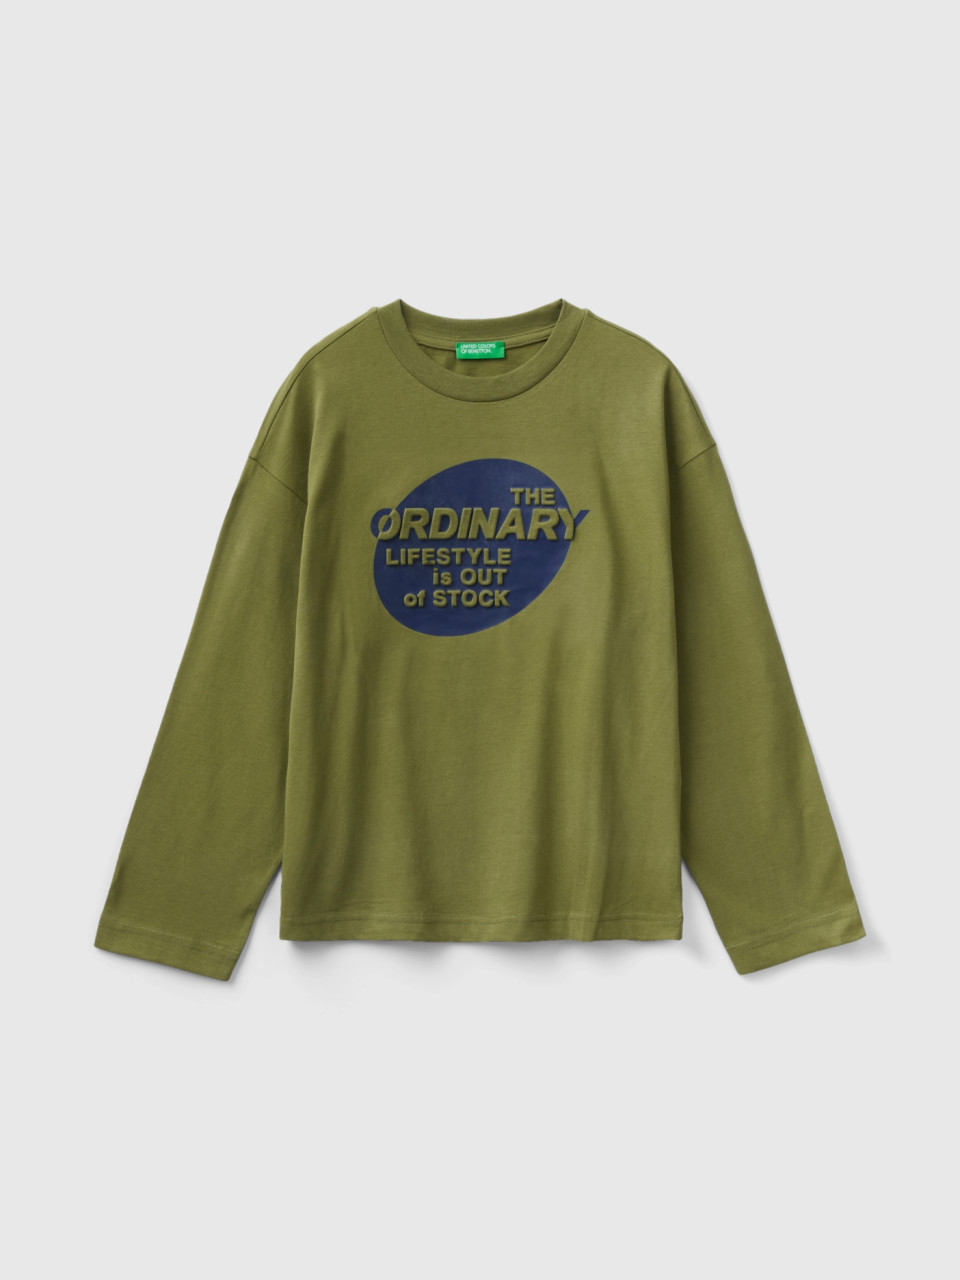 Benetton, T-shirt In Warm Cotton With Print, Military Green, Kids